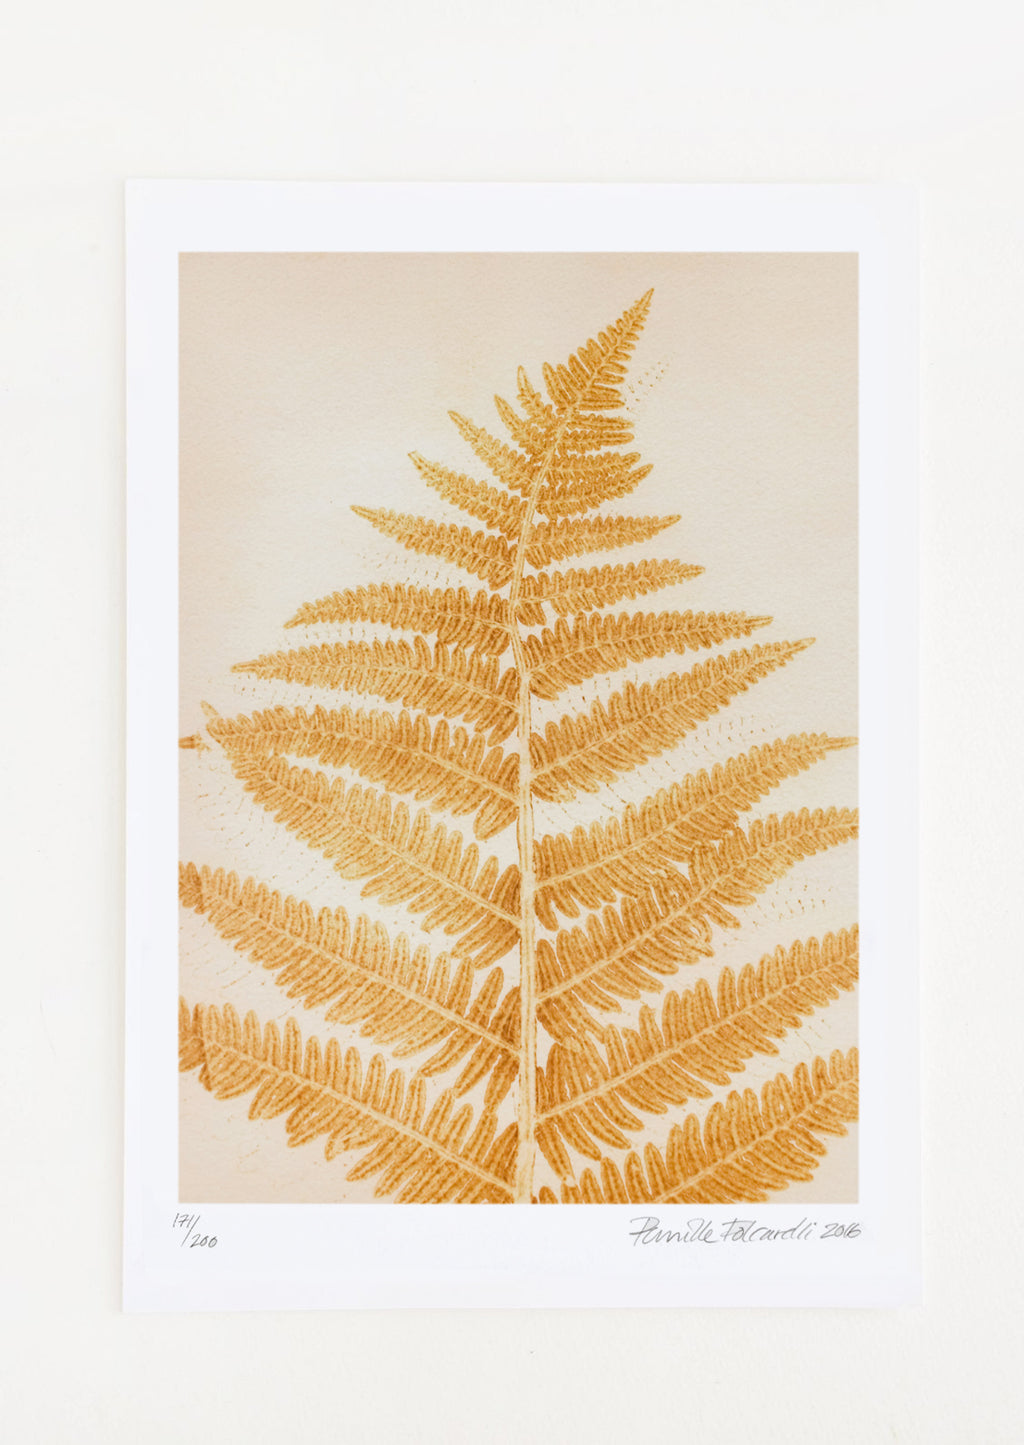 1: A botanical print of a fern frond in yellow mustard color.